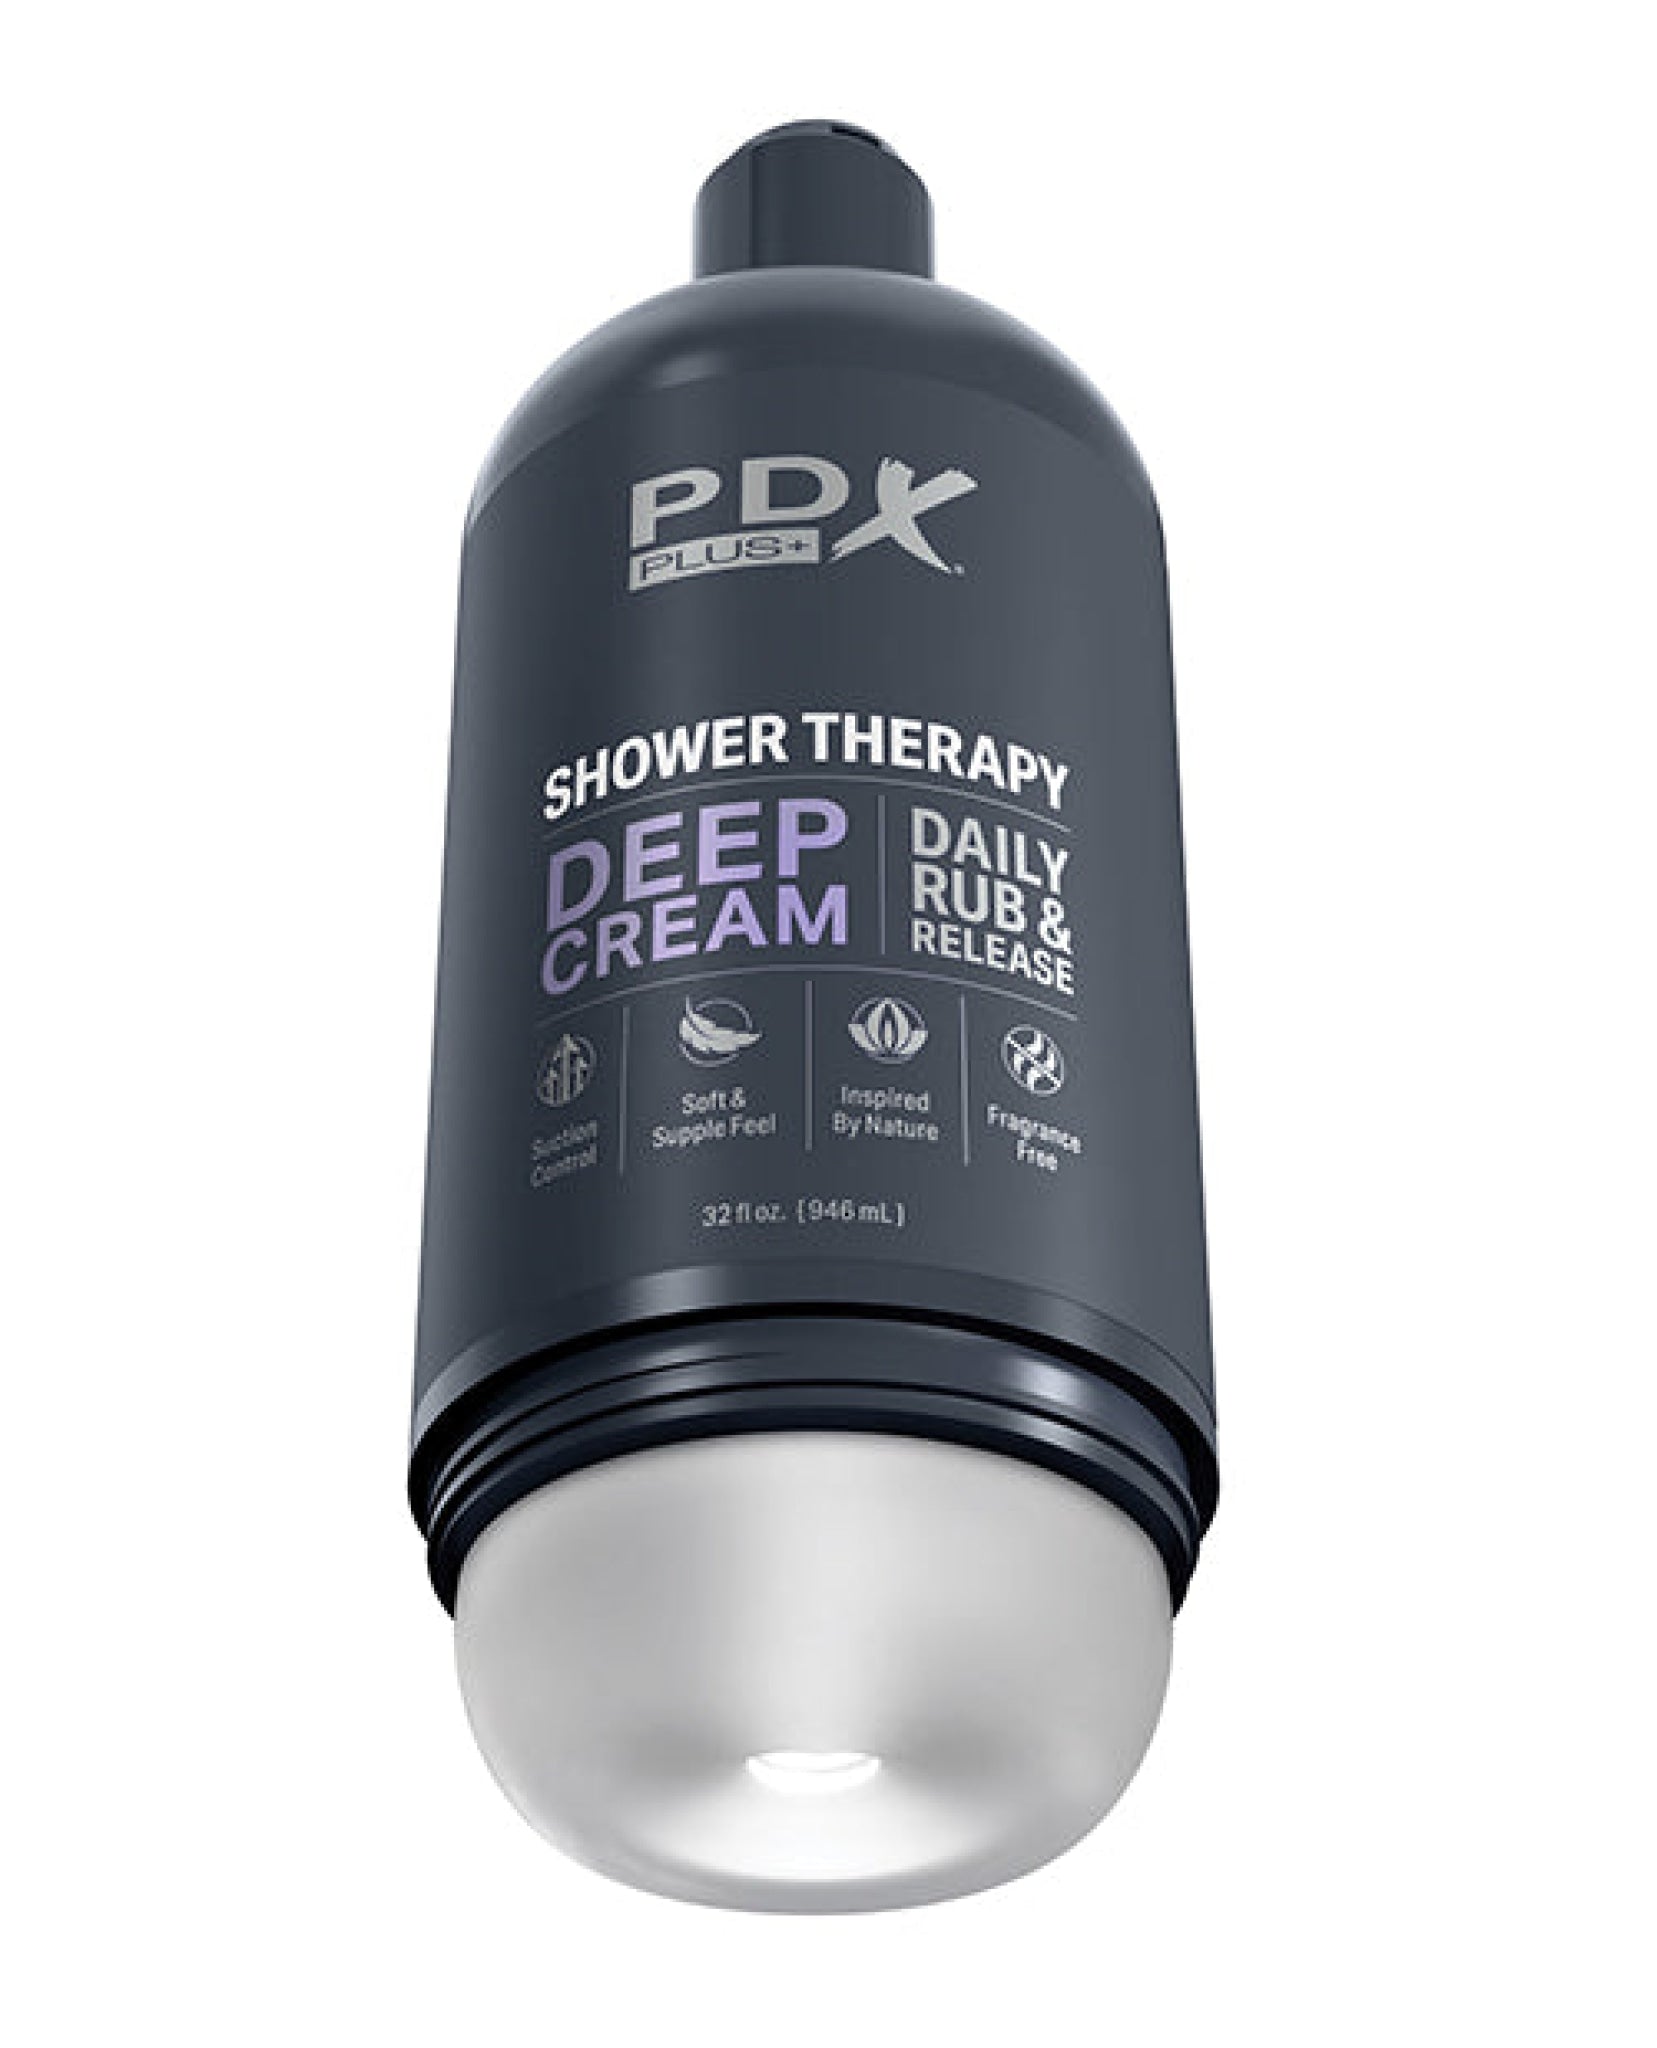 Pdx Plus Shower Therapy Deep Cream - Frosted Pdx